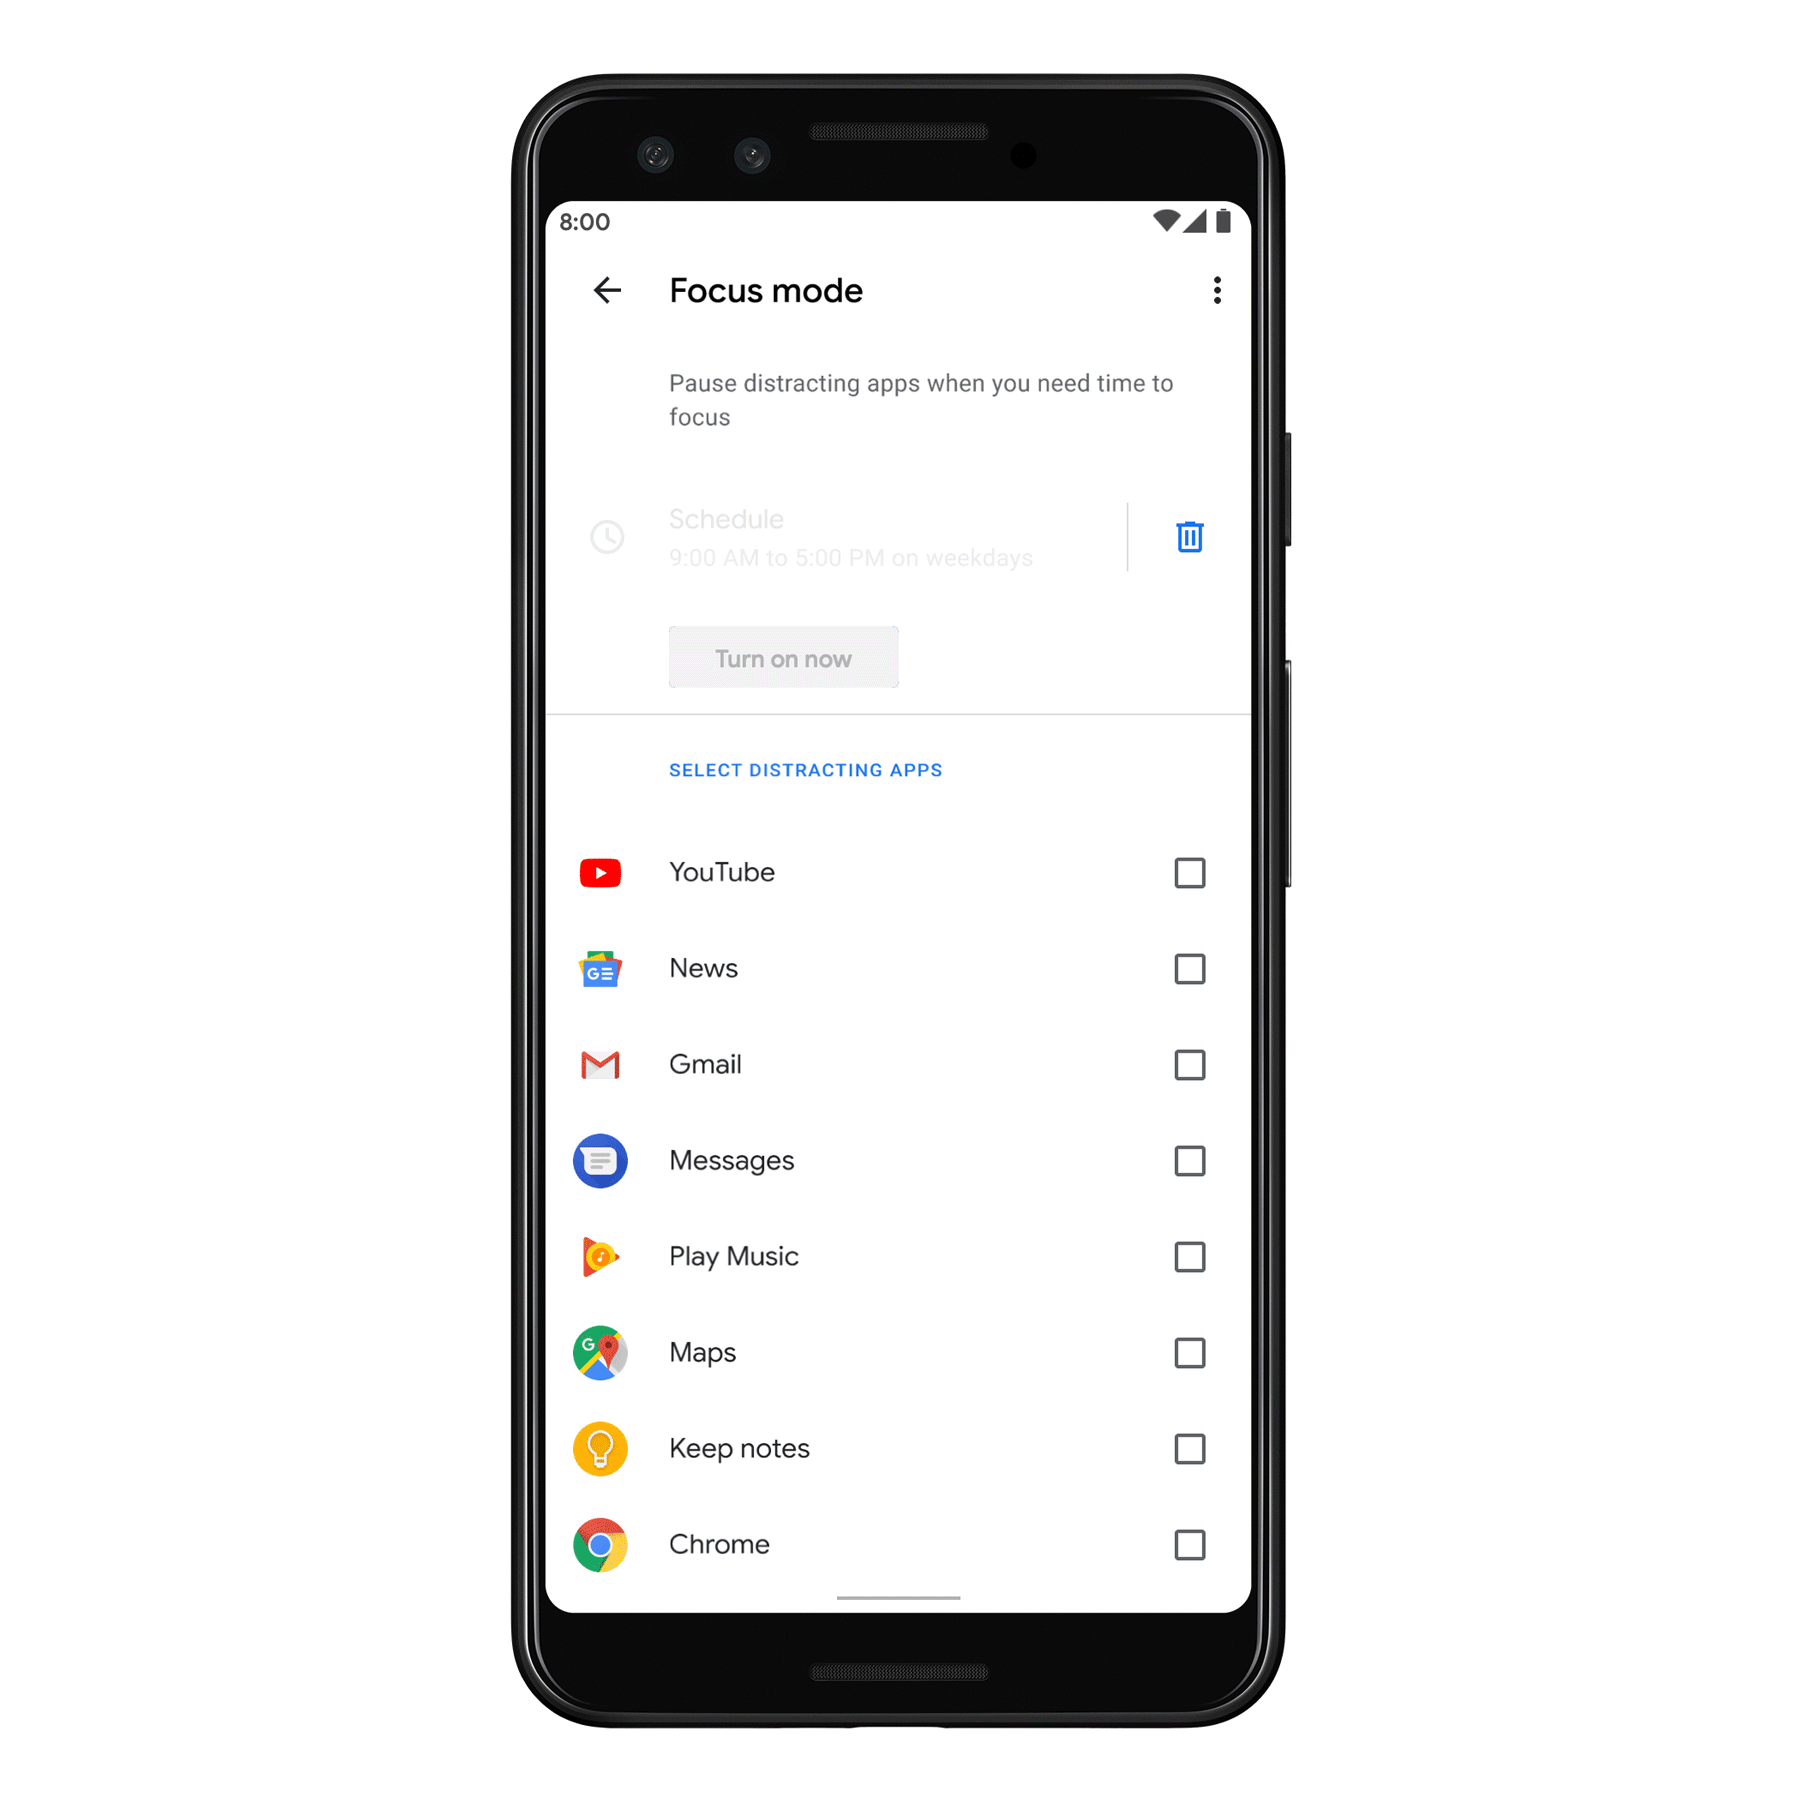 Digital Wellbeing 'Focus Mode' Out of Beta - Arrived on Android 9 and 10